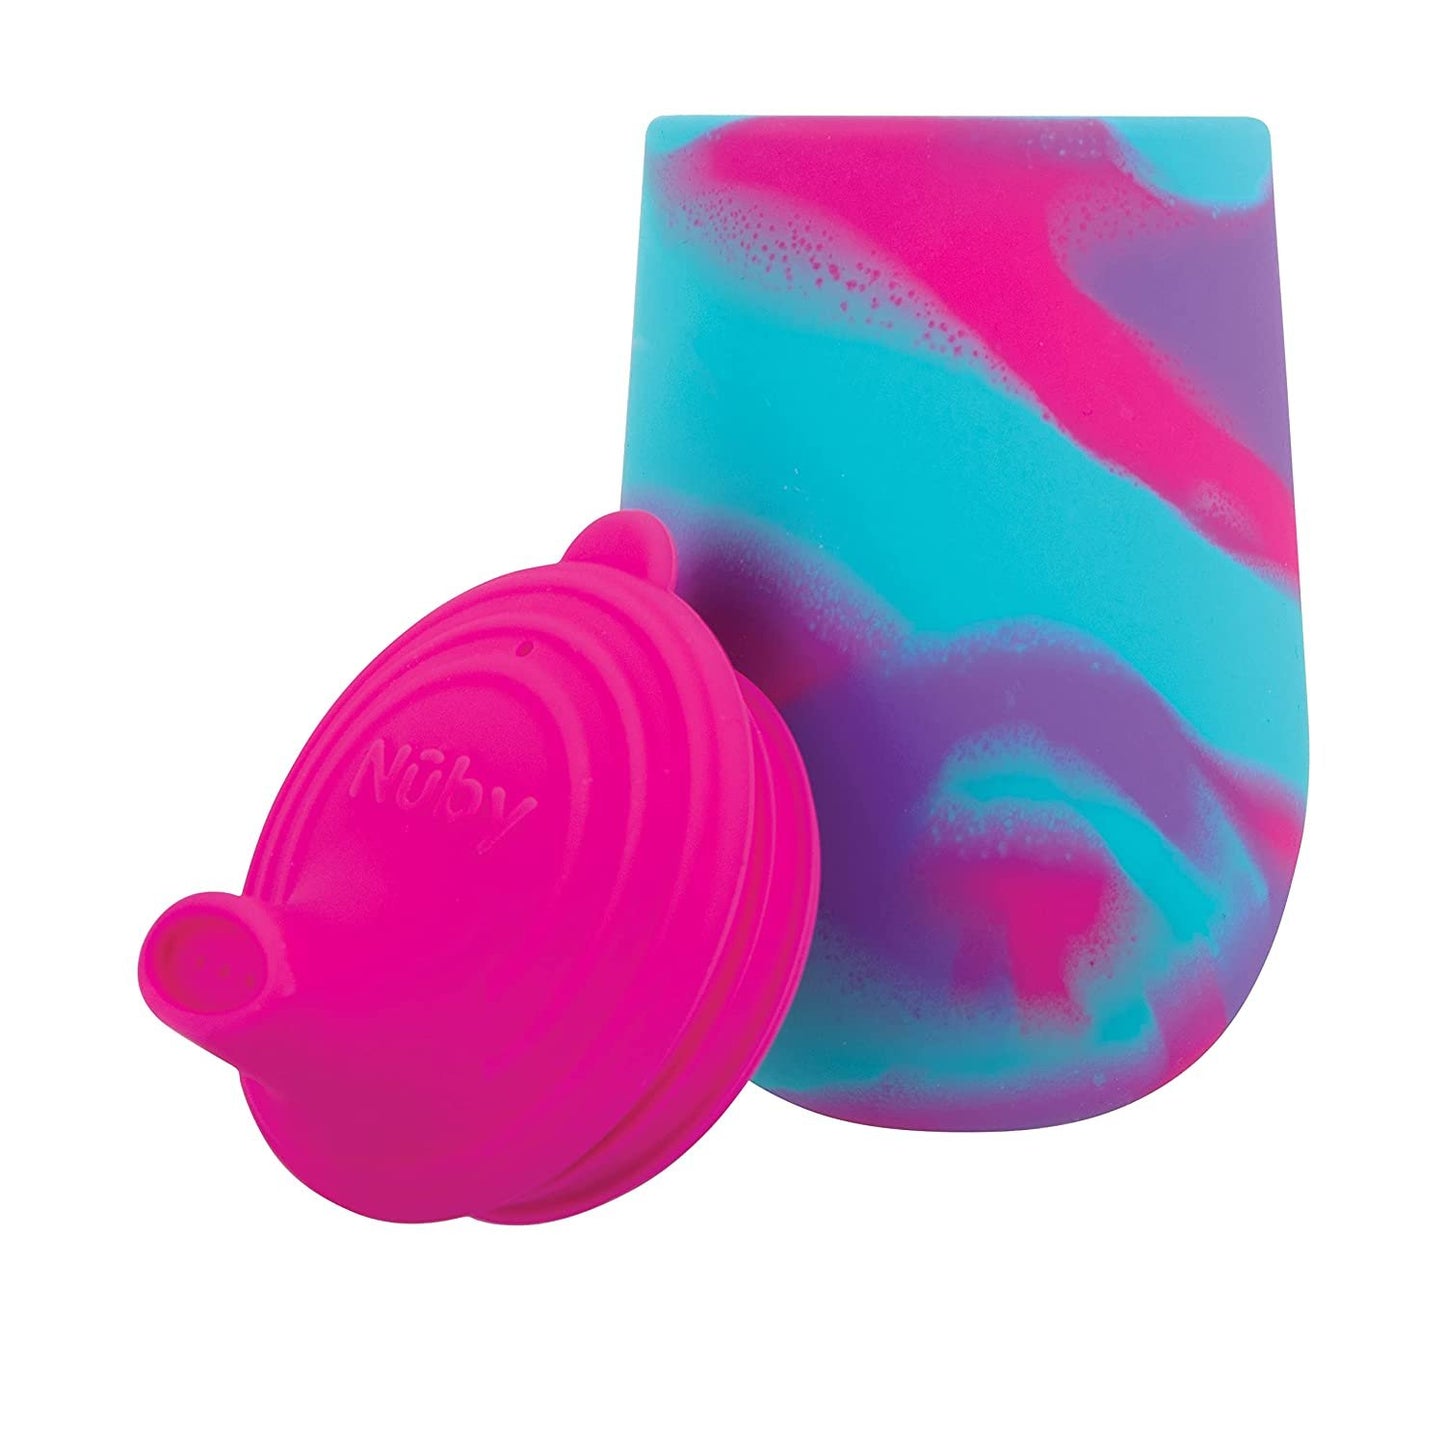 Nuby Silicone Tie-dye First Training Cup with Free Flow Soft Spout - 6oz, 6+ Months, Pink/Purple